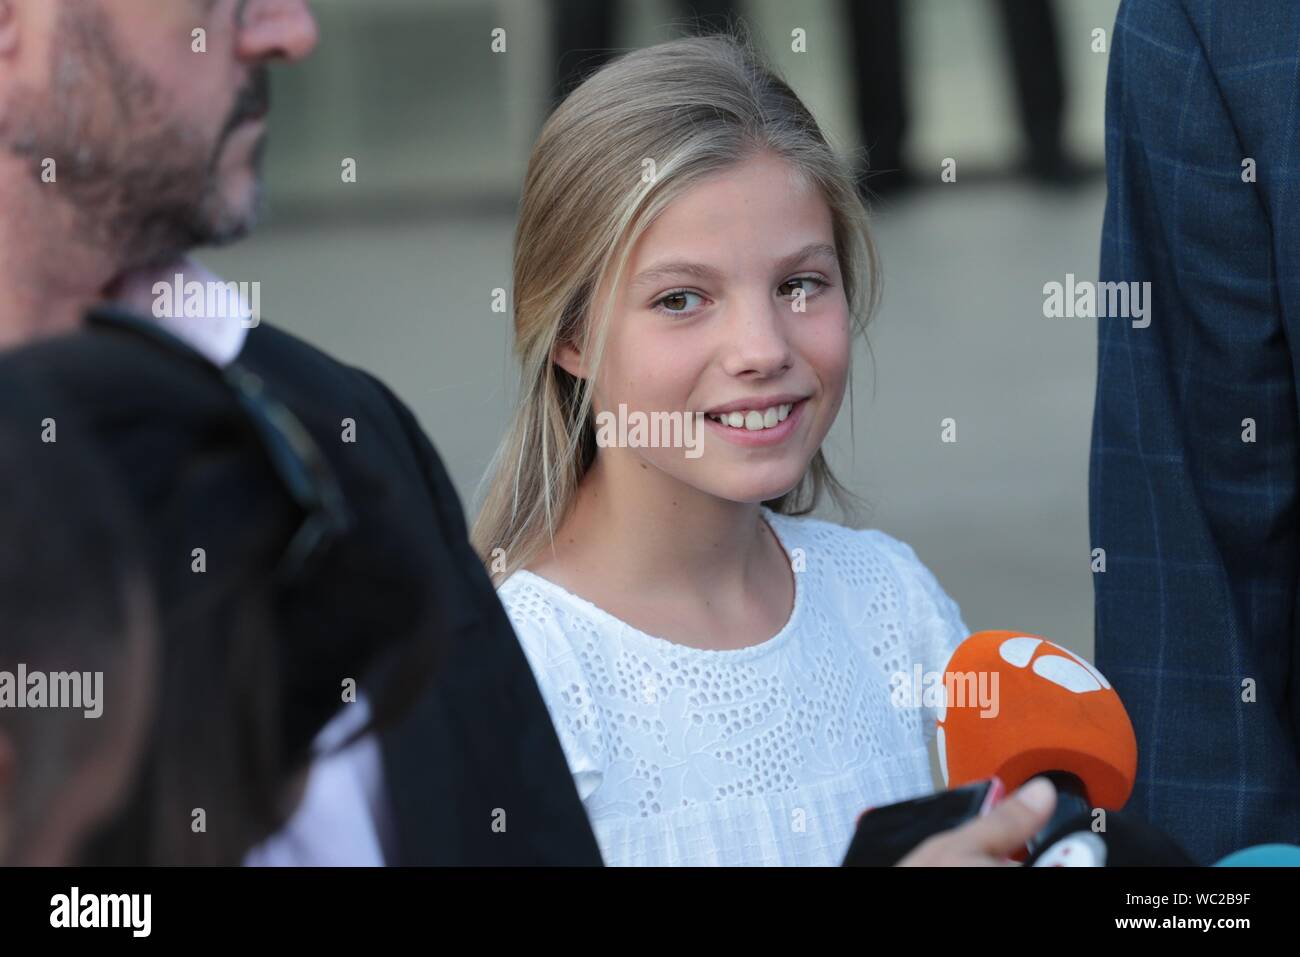 Madrid, Spain. 27th Aug, 2019. Infanta Sofia.Felipe VI and Letizia Reyes de España speak with the press accompanied by their daughters Princess Leonor and the Infanta Sofia in the hospital after visiting King Juan Carlos I, who is recovering from an open heart operation. Credit: dpa picture alliance/Alamy Live News Stock Photo